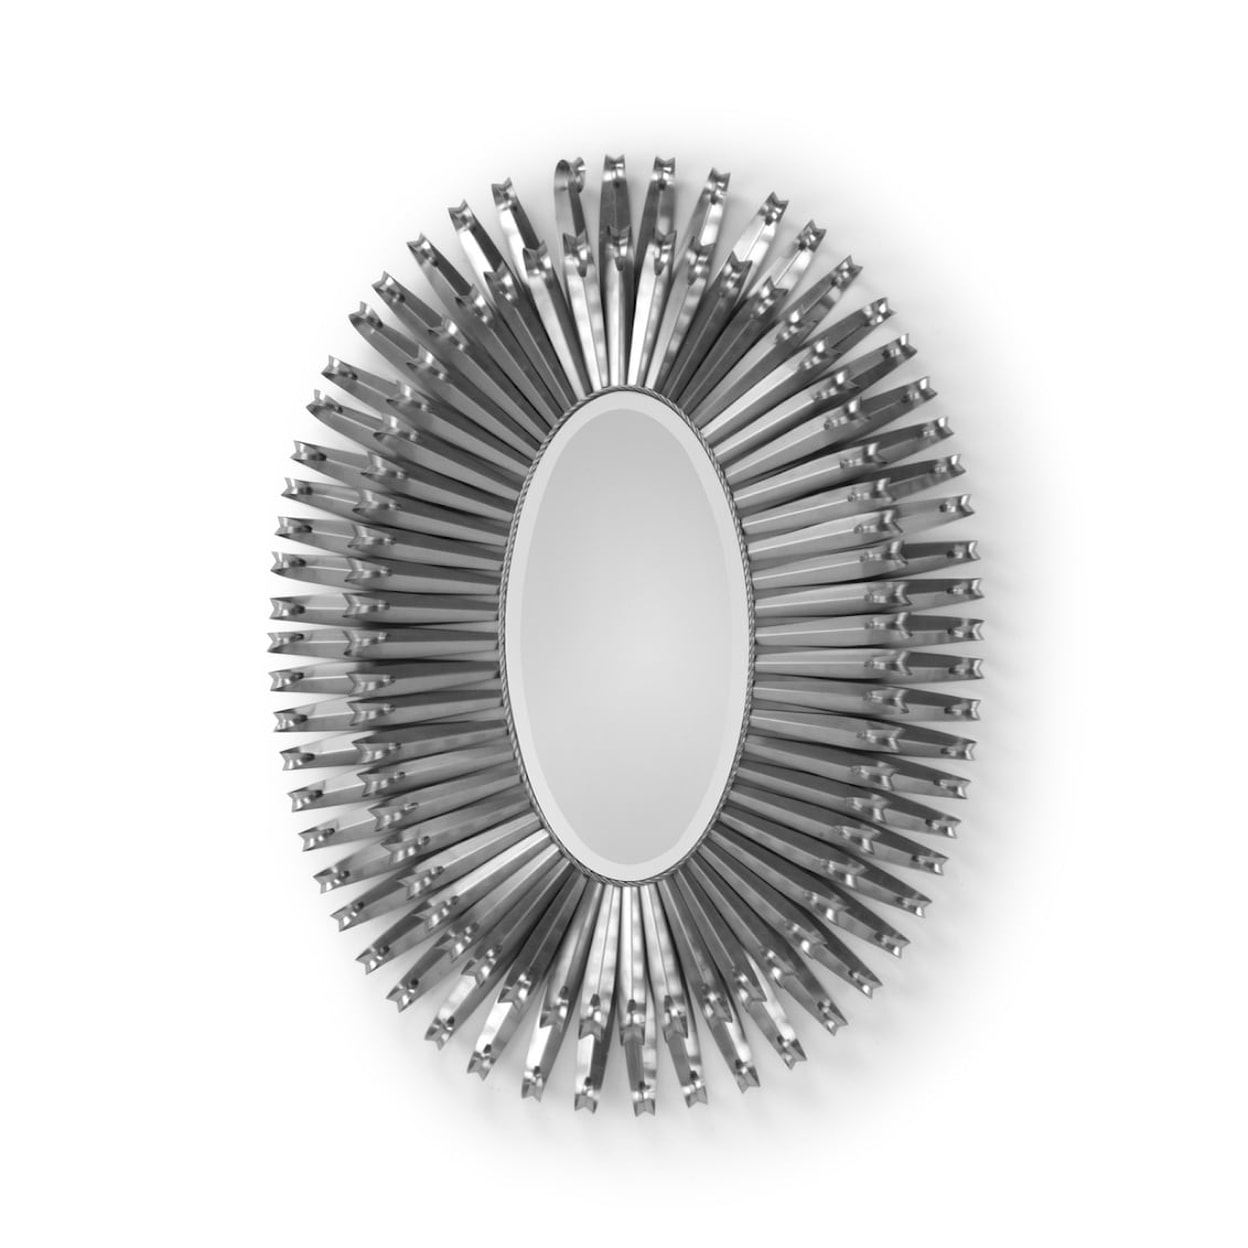 Wildwood Lamps Mirrors CURLS AROUND OVAL MIRROR